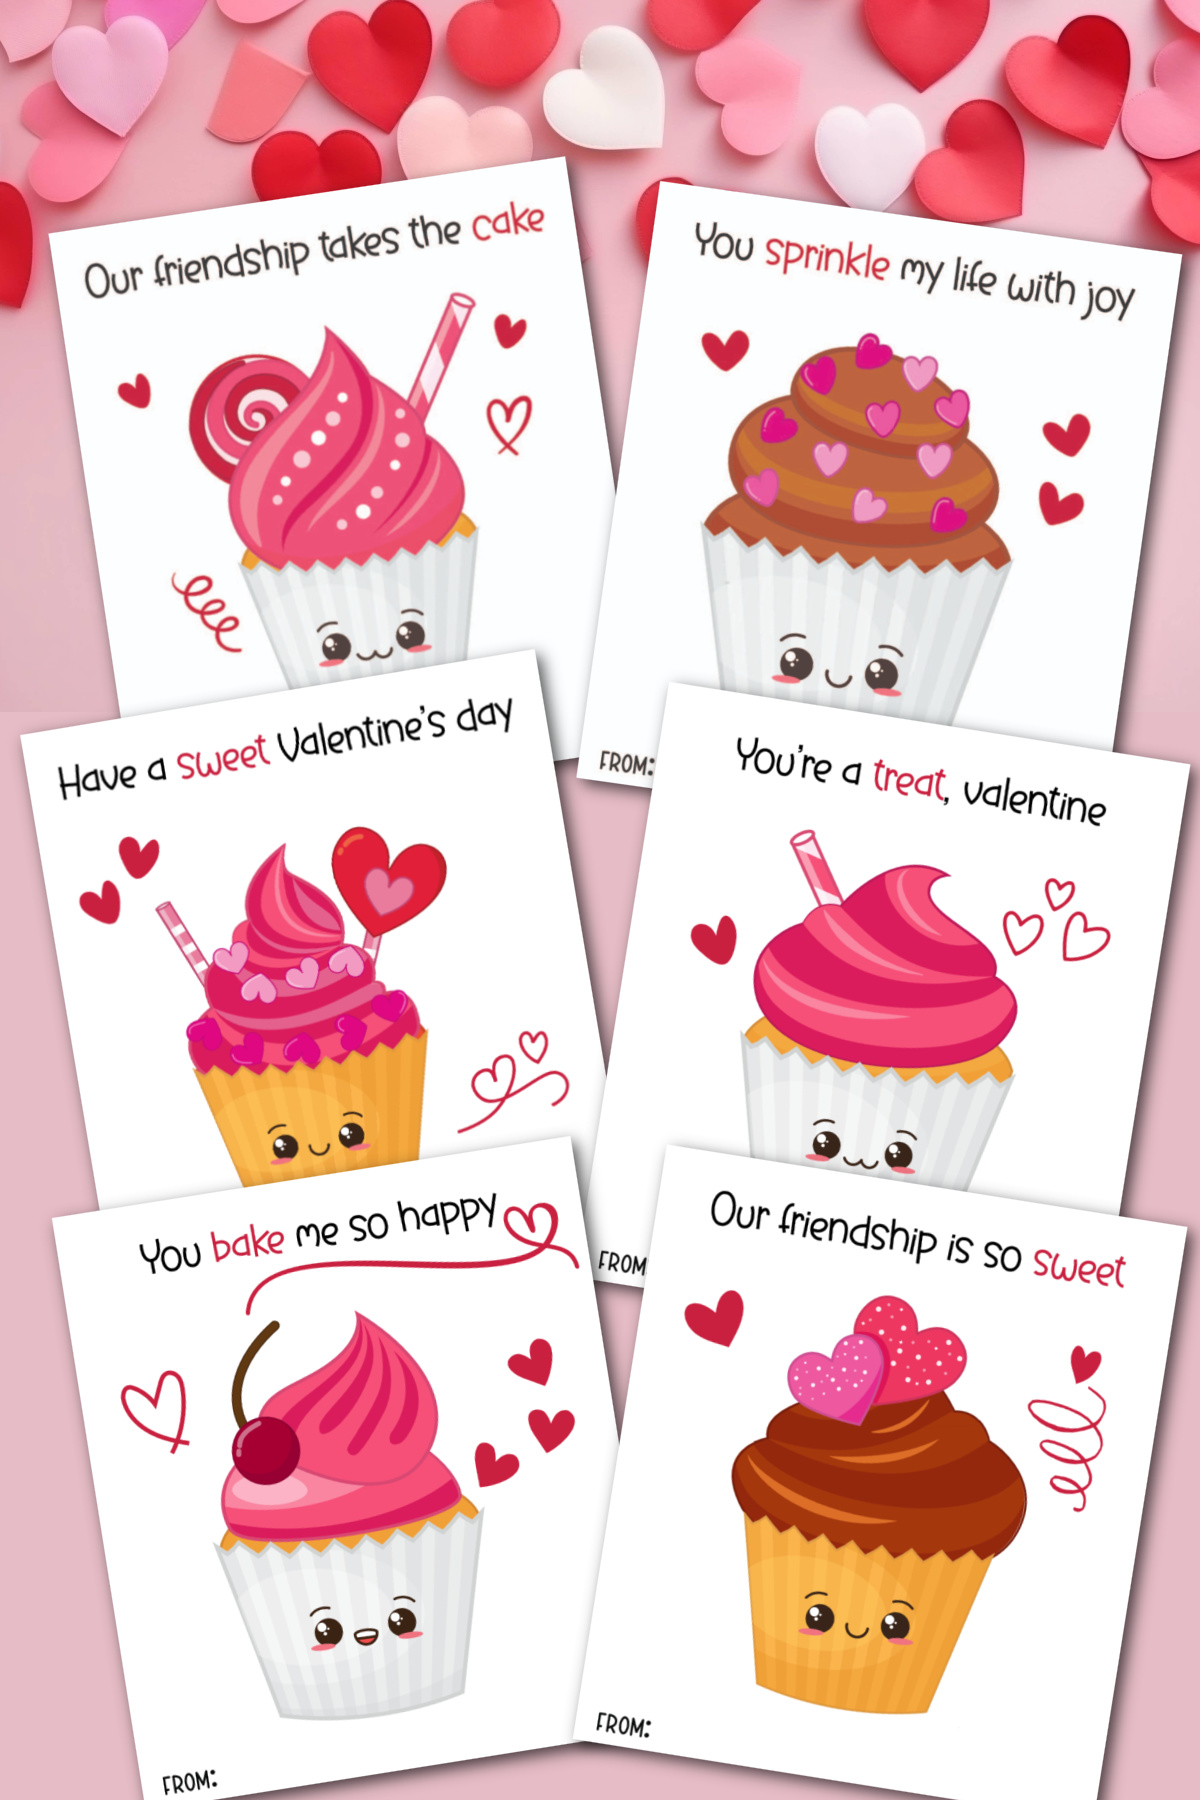 Cupcake valentine's day cards on pink background